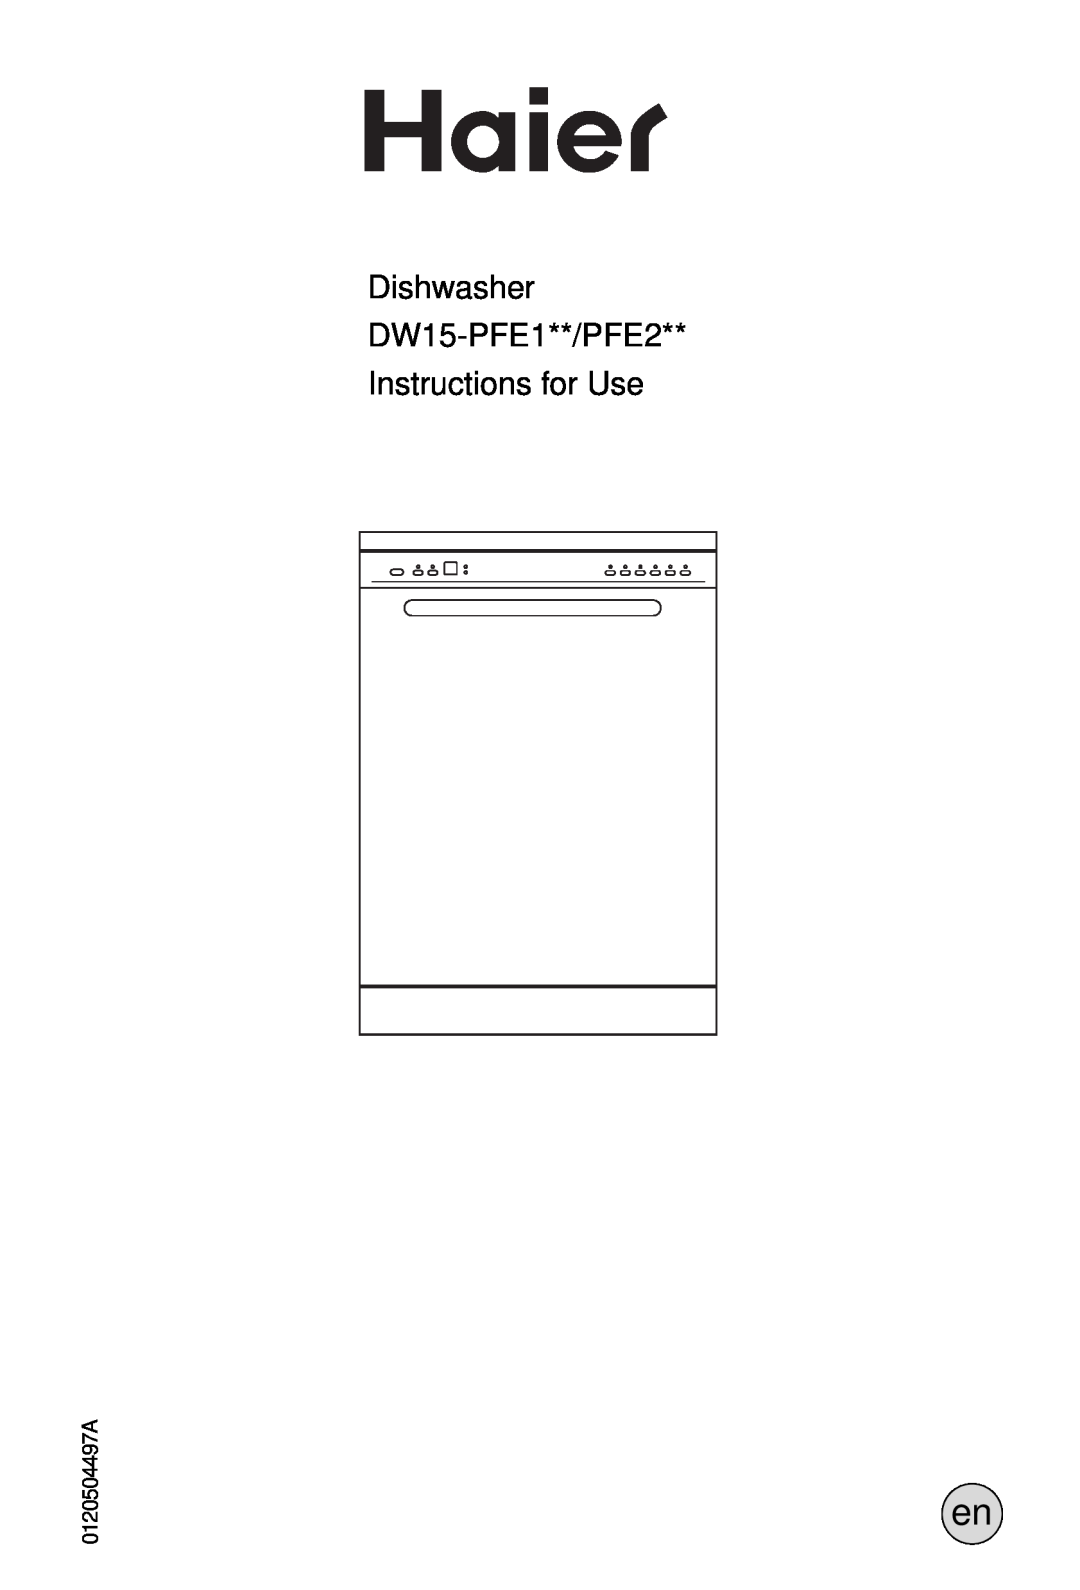 Haier DW15-PFE2 manual Dishwasher DW15-PFE1**/PFE2 Instructions for Use 